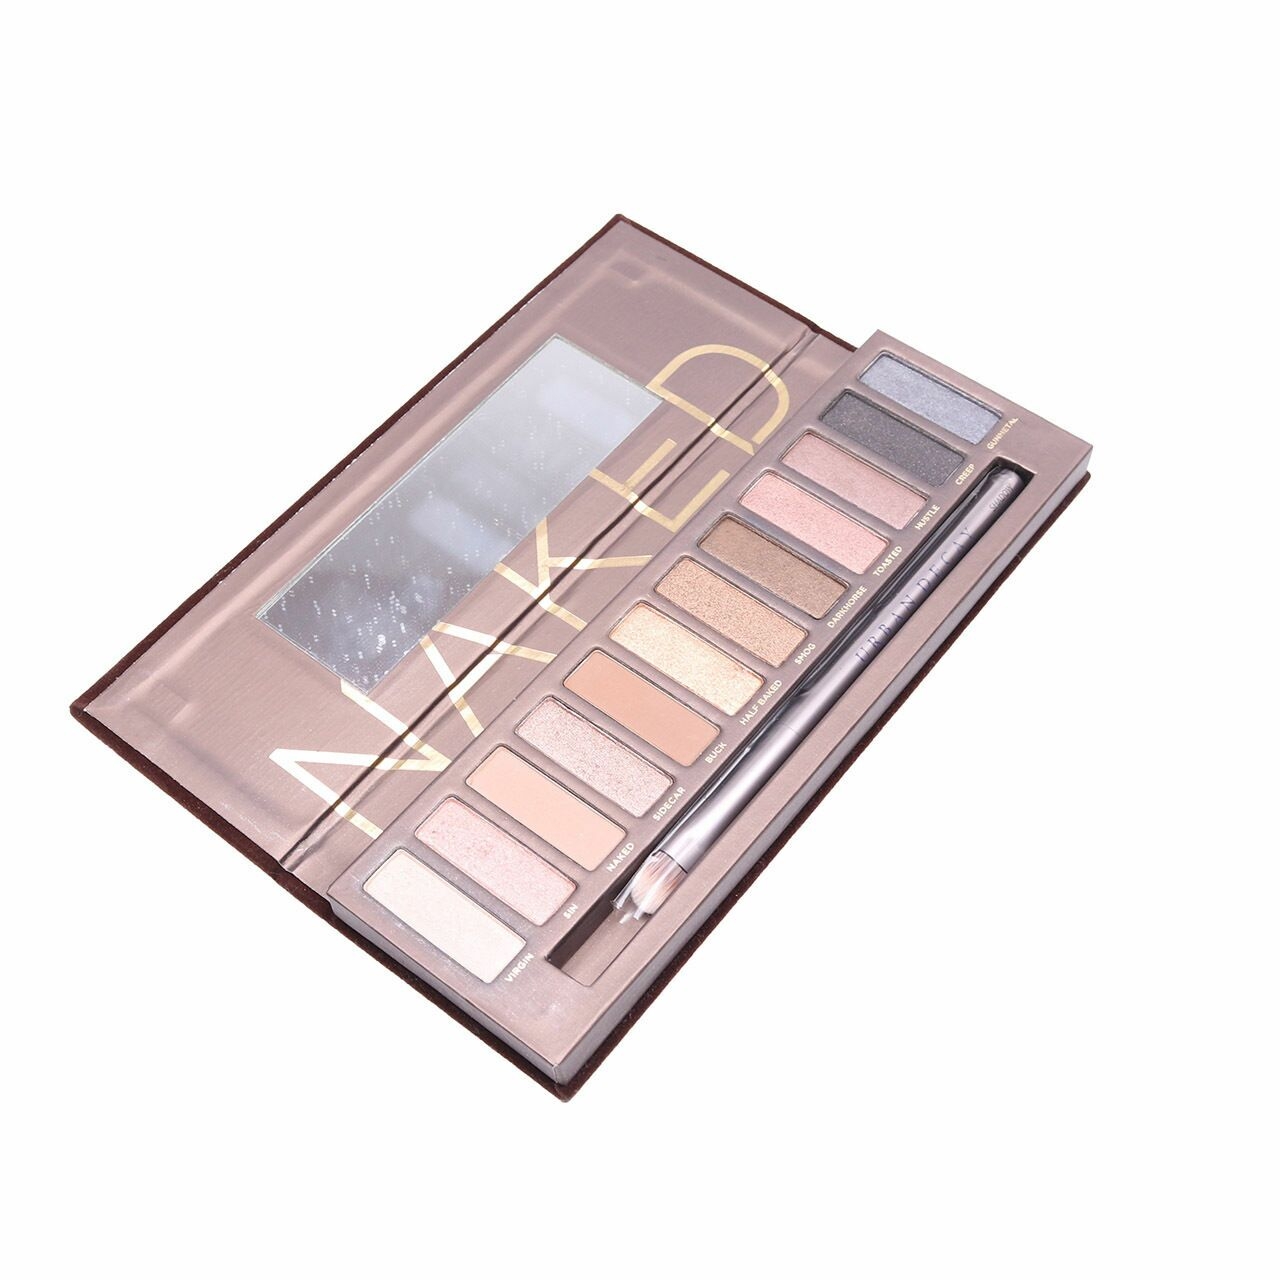 Urban Decay Eyeshadow Sets and Palette